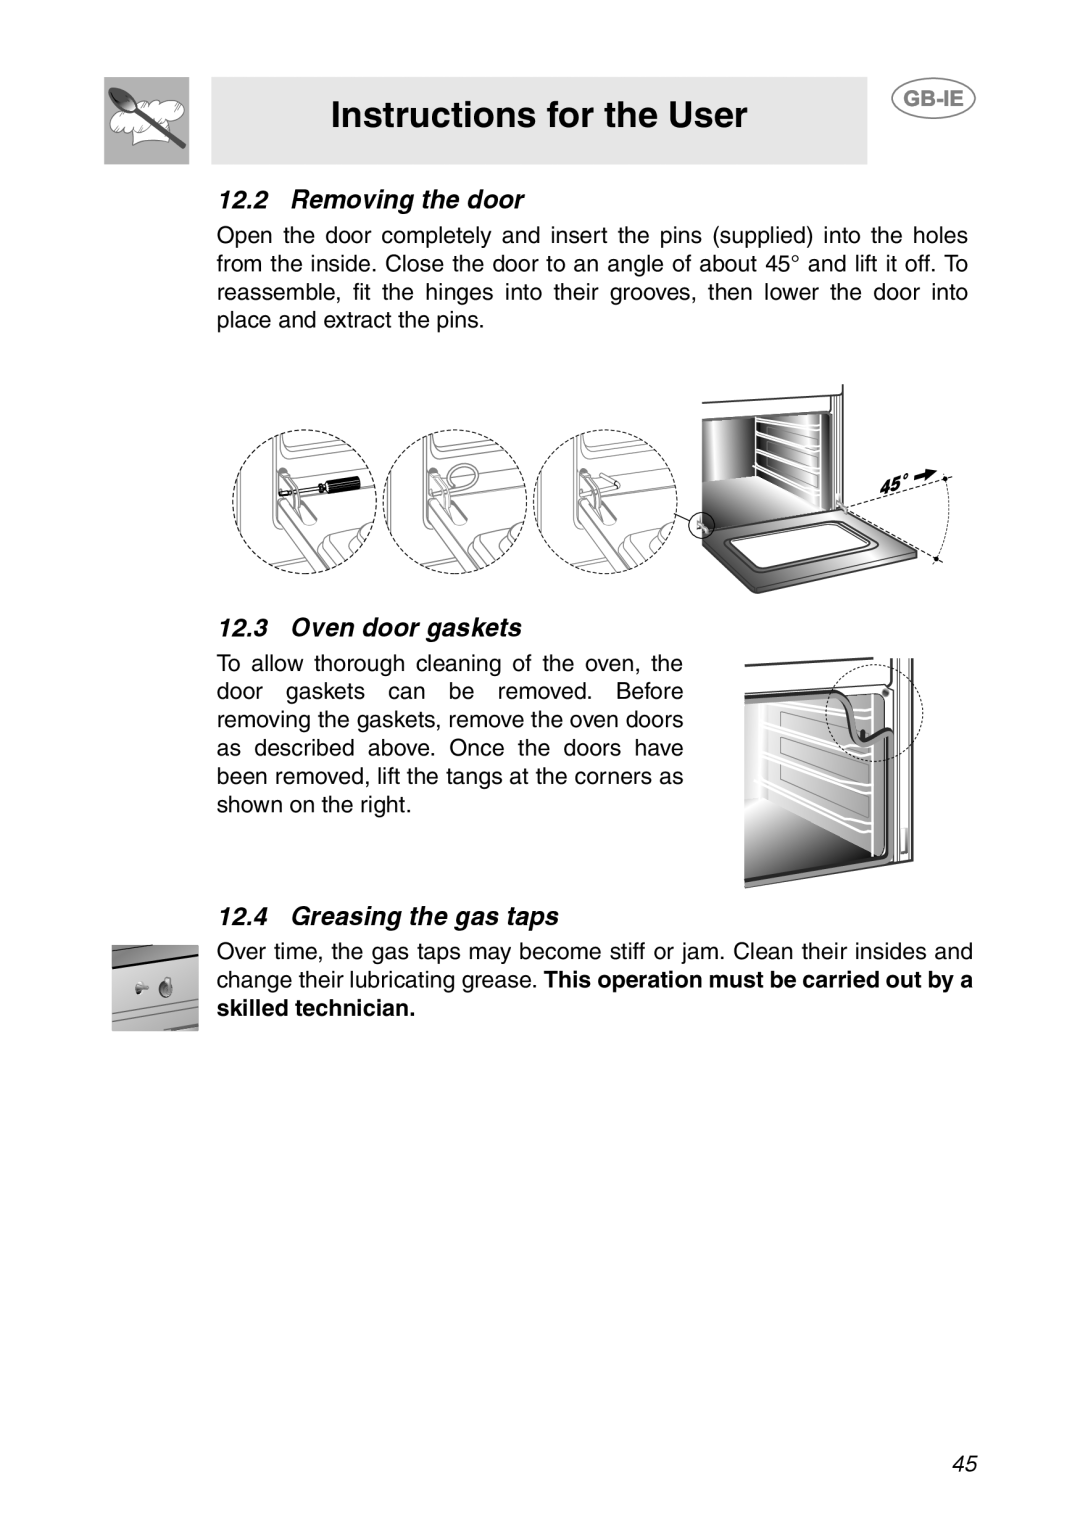 Smeg CS150SA Instructions for the User, Removing the door, Oven door gaskets, Greasing the gas taps, skilled technician 